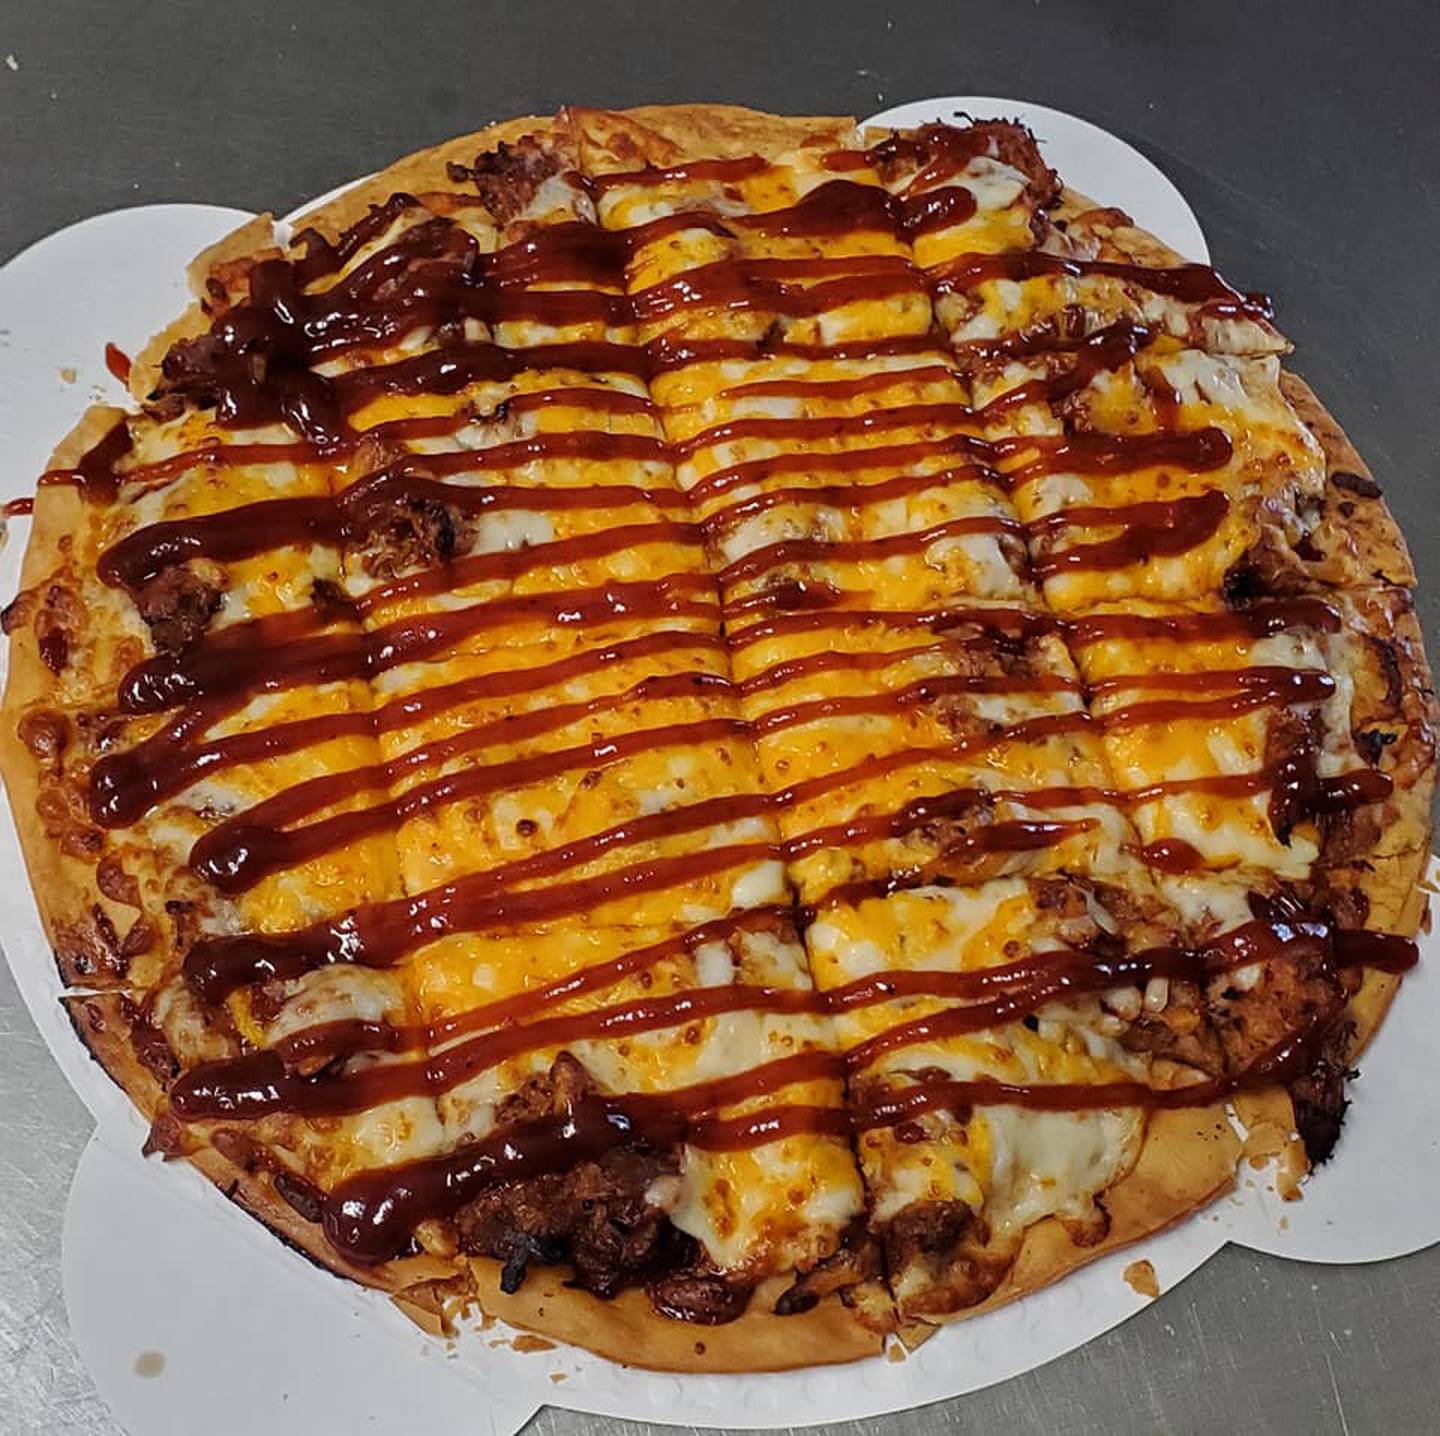 Skuddlebutts Pizza & Catering in Dowers Grove was voted in the top 10 pizza places in DuPage County by readers in 2021. (Photo from Skuddlebutts Pizza & Catering Facebook page)